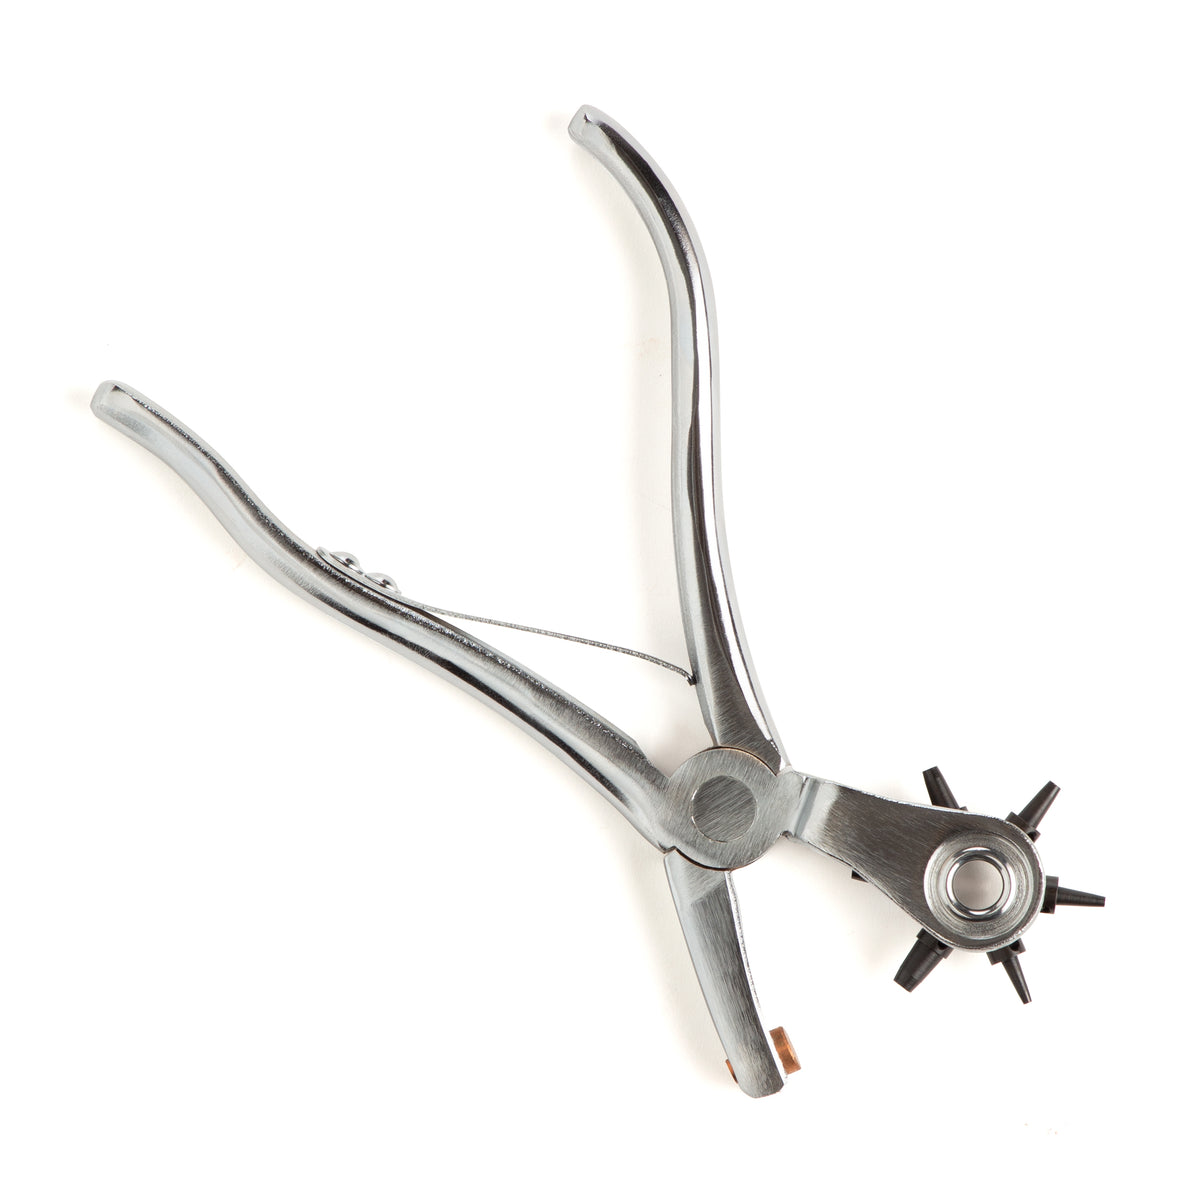 Leather Hole Punch Pliers 9 with Multi-size Rotating Wheel for